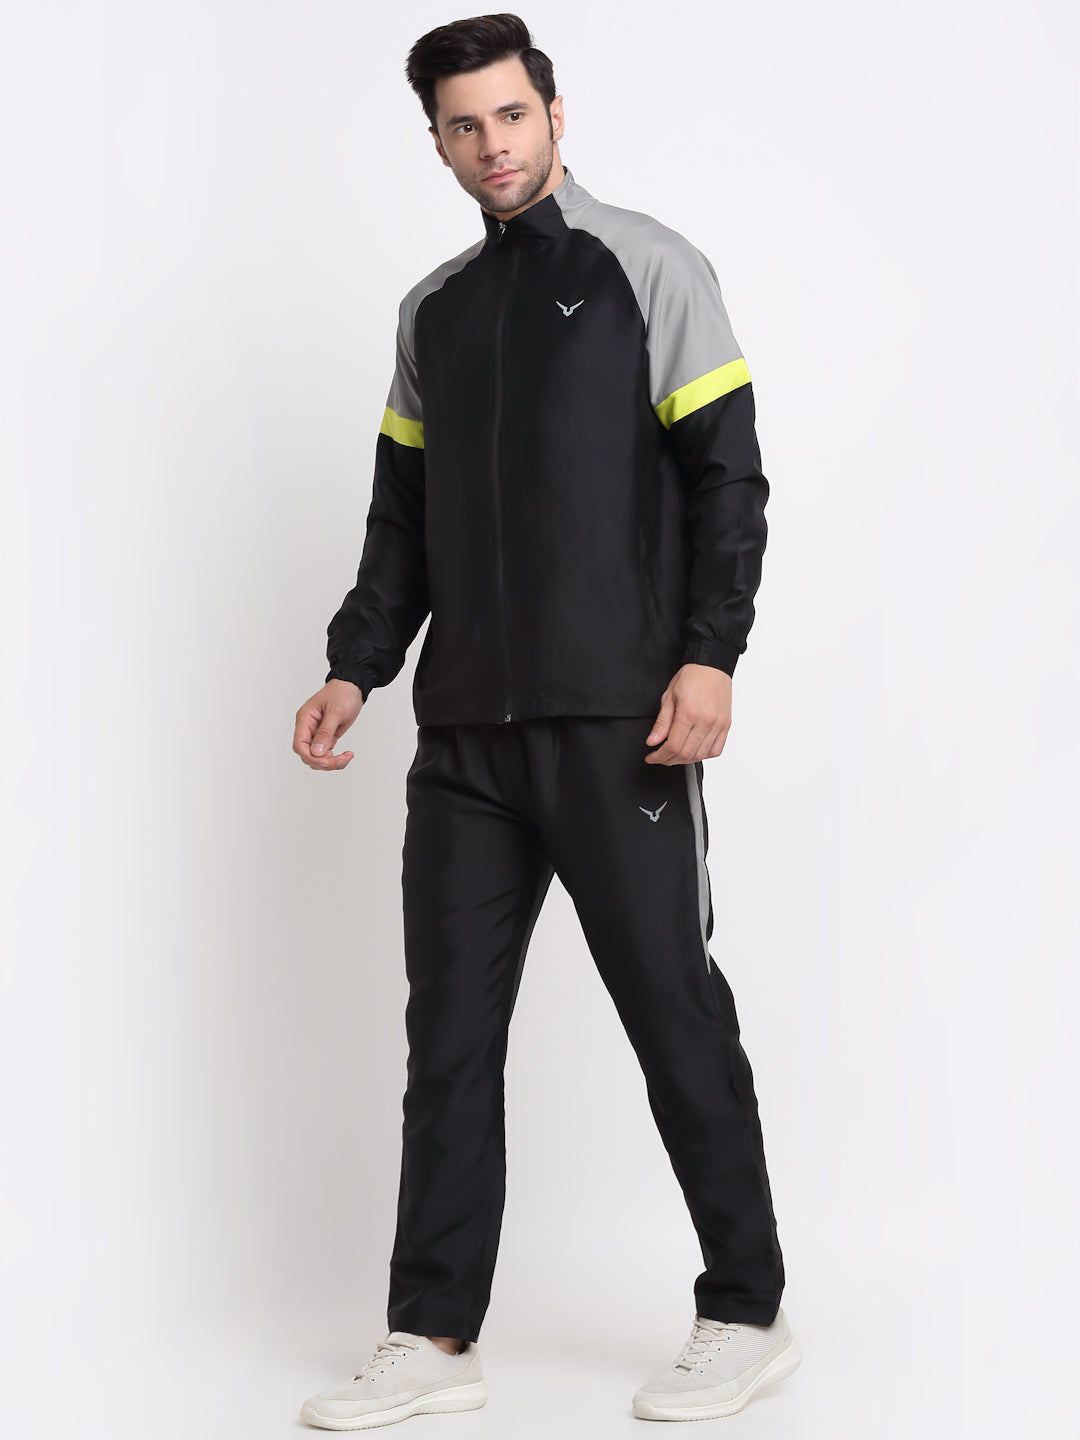 Hifzaa winter Track suit for men tracksuit mens Polar fleece warm fabric.  Sizes M to 4xl